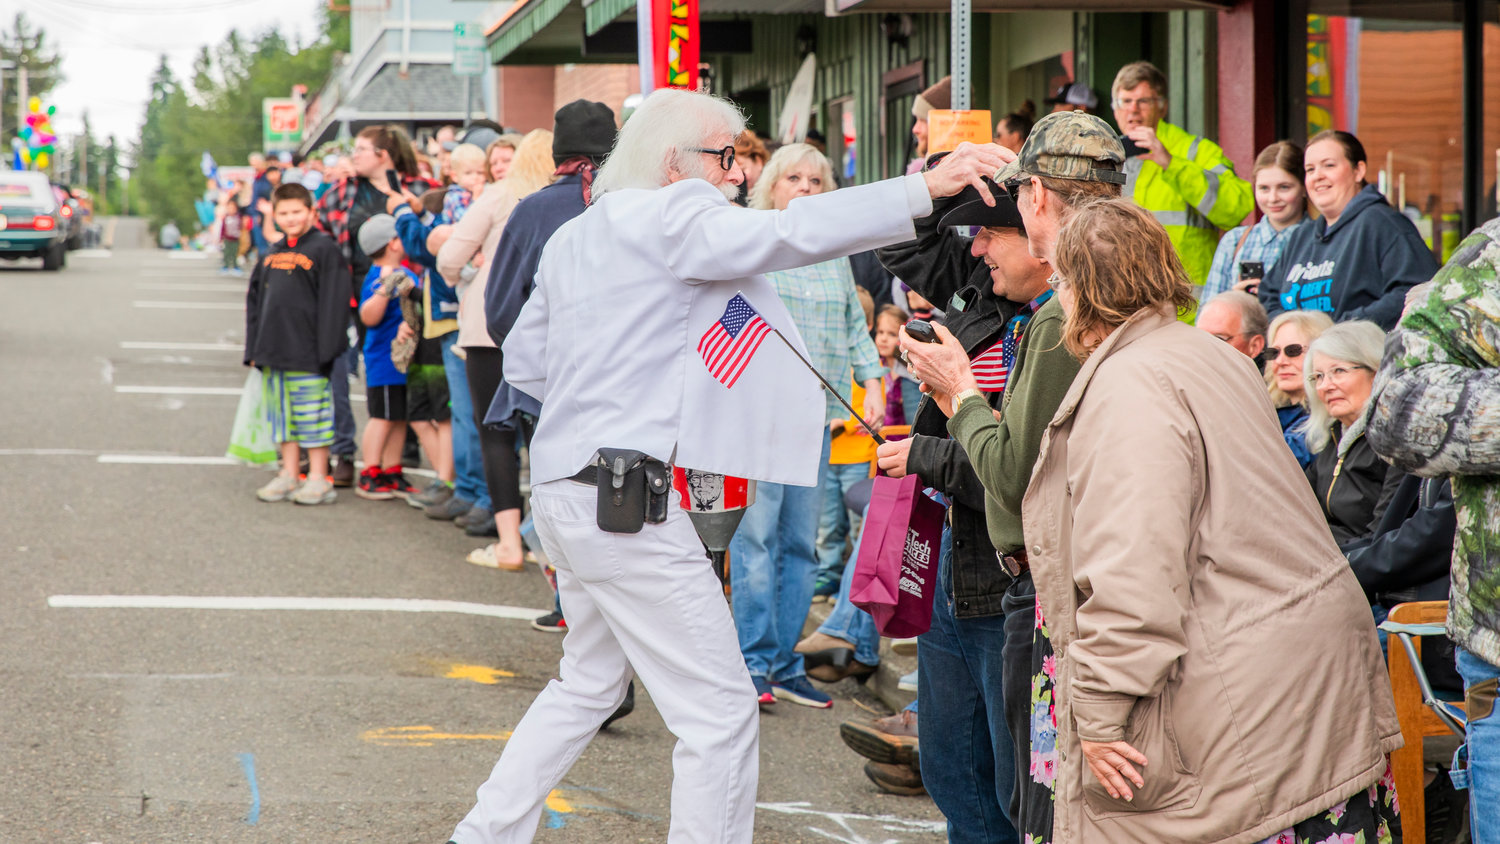 Jim Taylor dressed as Colonel Sanders greets visitors in downtown Winlock during the Egg Days Festival parade on Saturday.